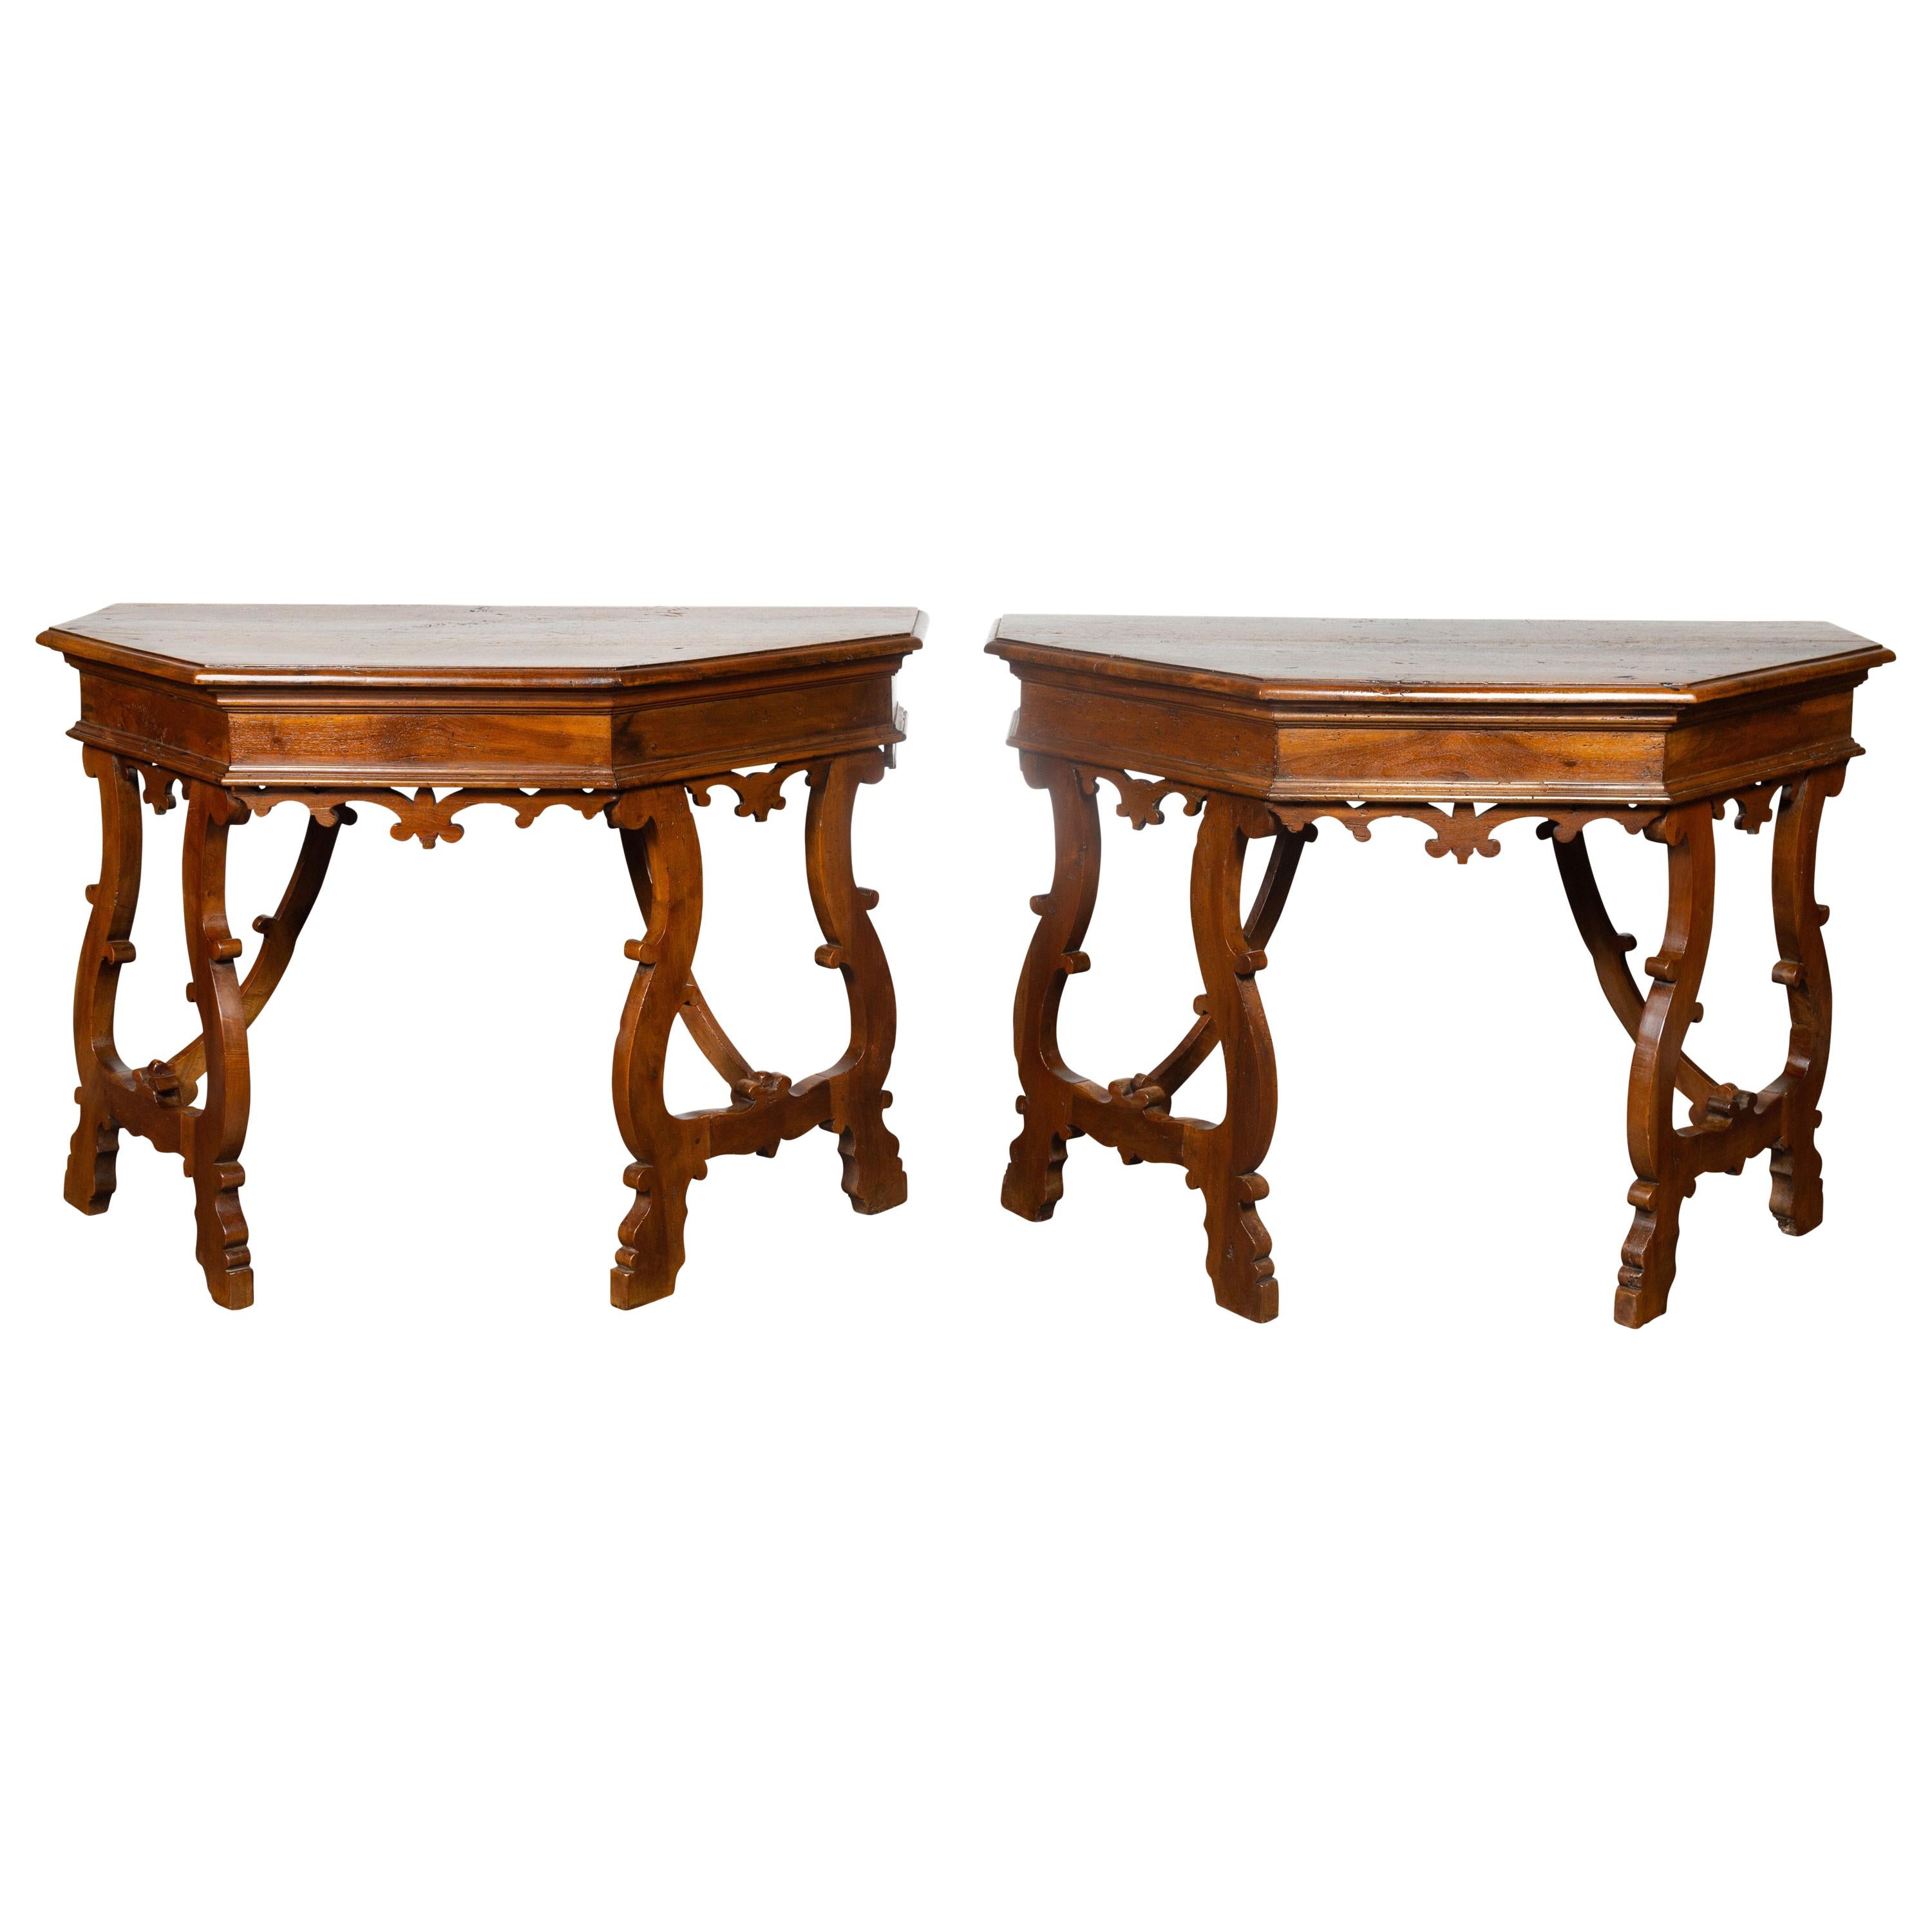 Pair of Italian mid 1800's Walnut Demi lune Tables with Lyre Shaped Legs